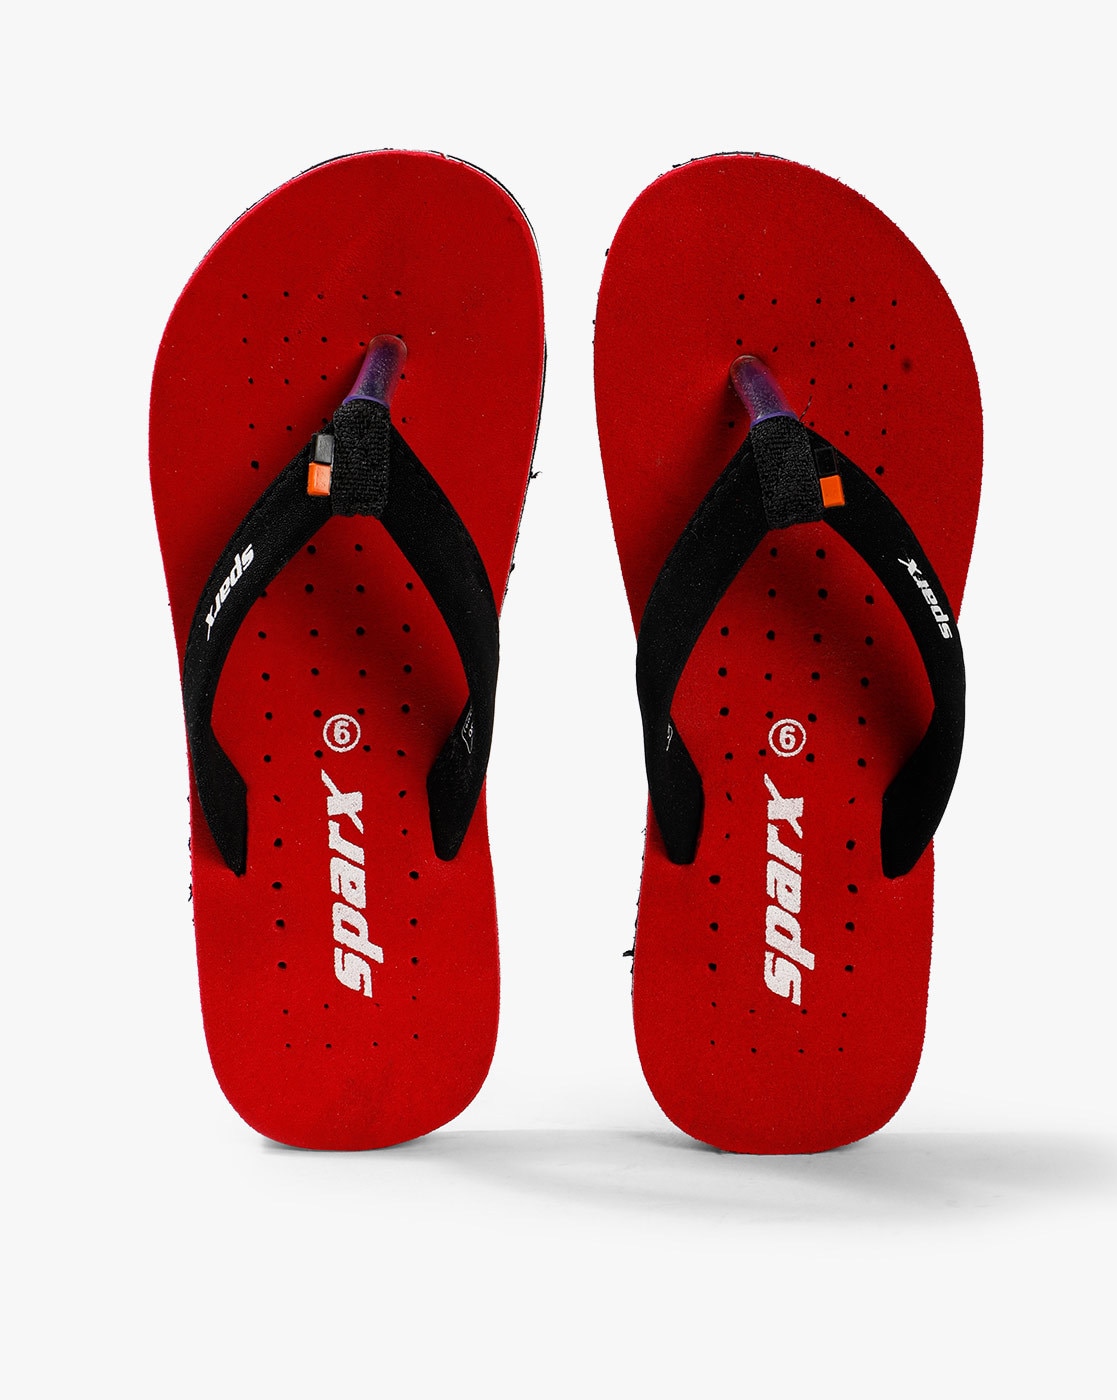 Sparx Mens Slippers in Sagar - Dealers, Manufacturers & Suppliers - Justdial-saigonsouth.com.vn